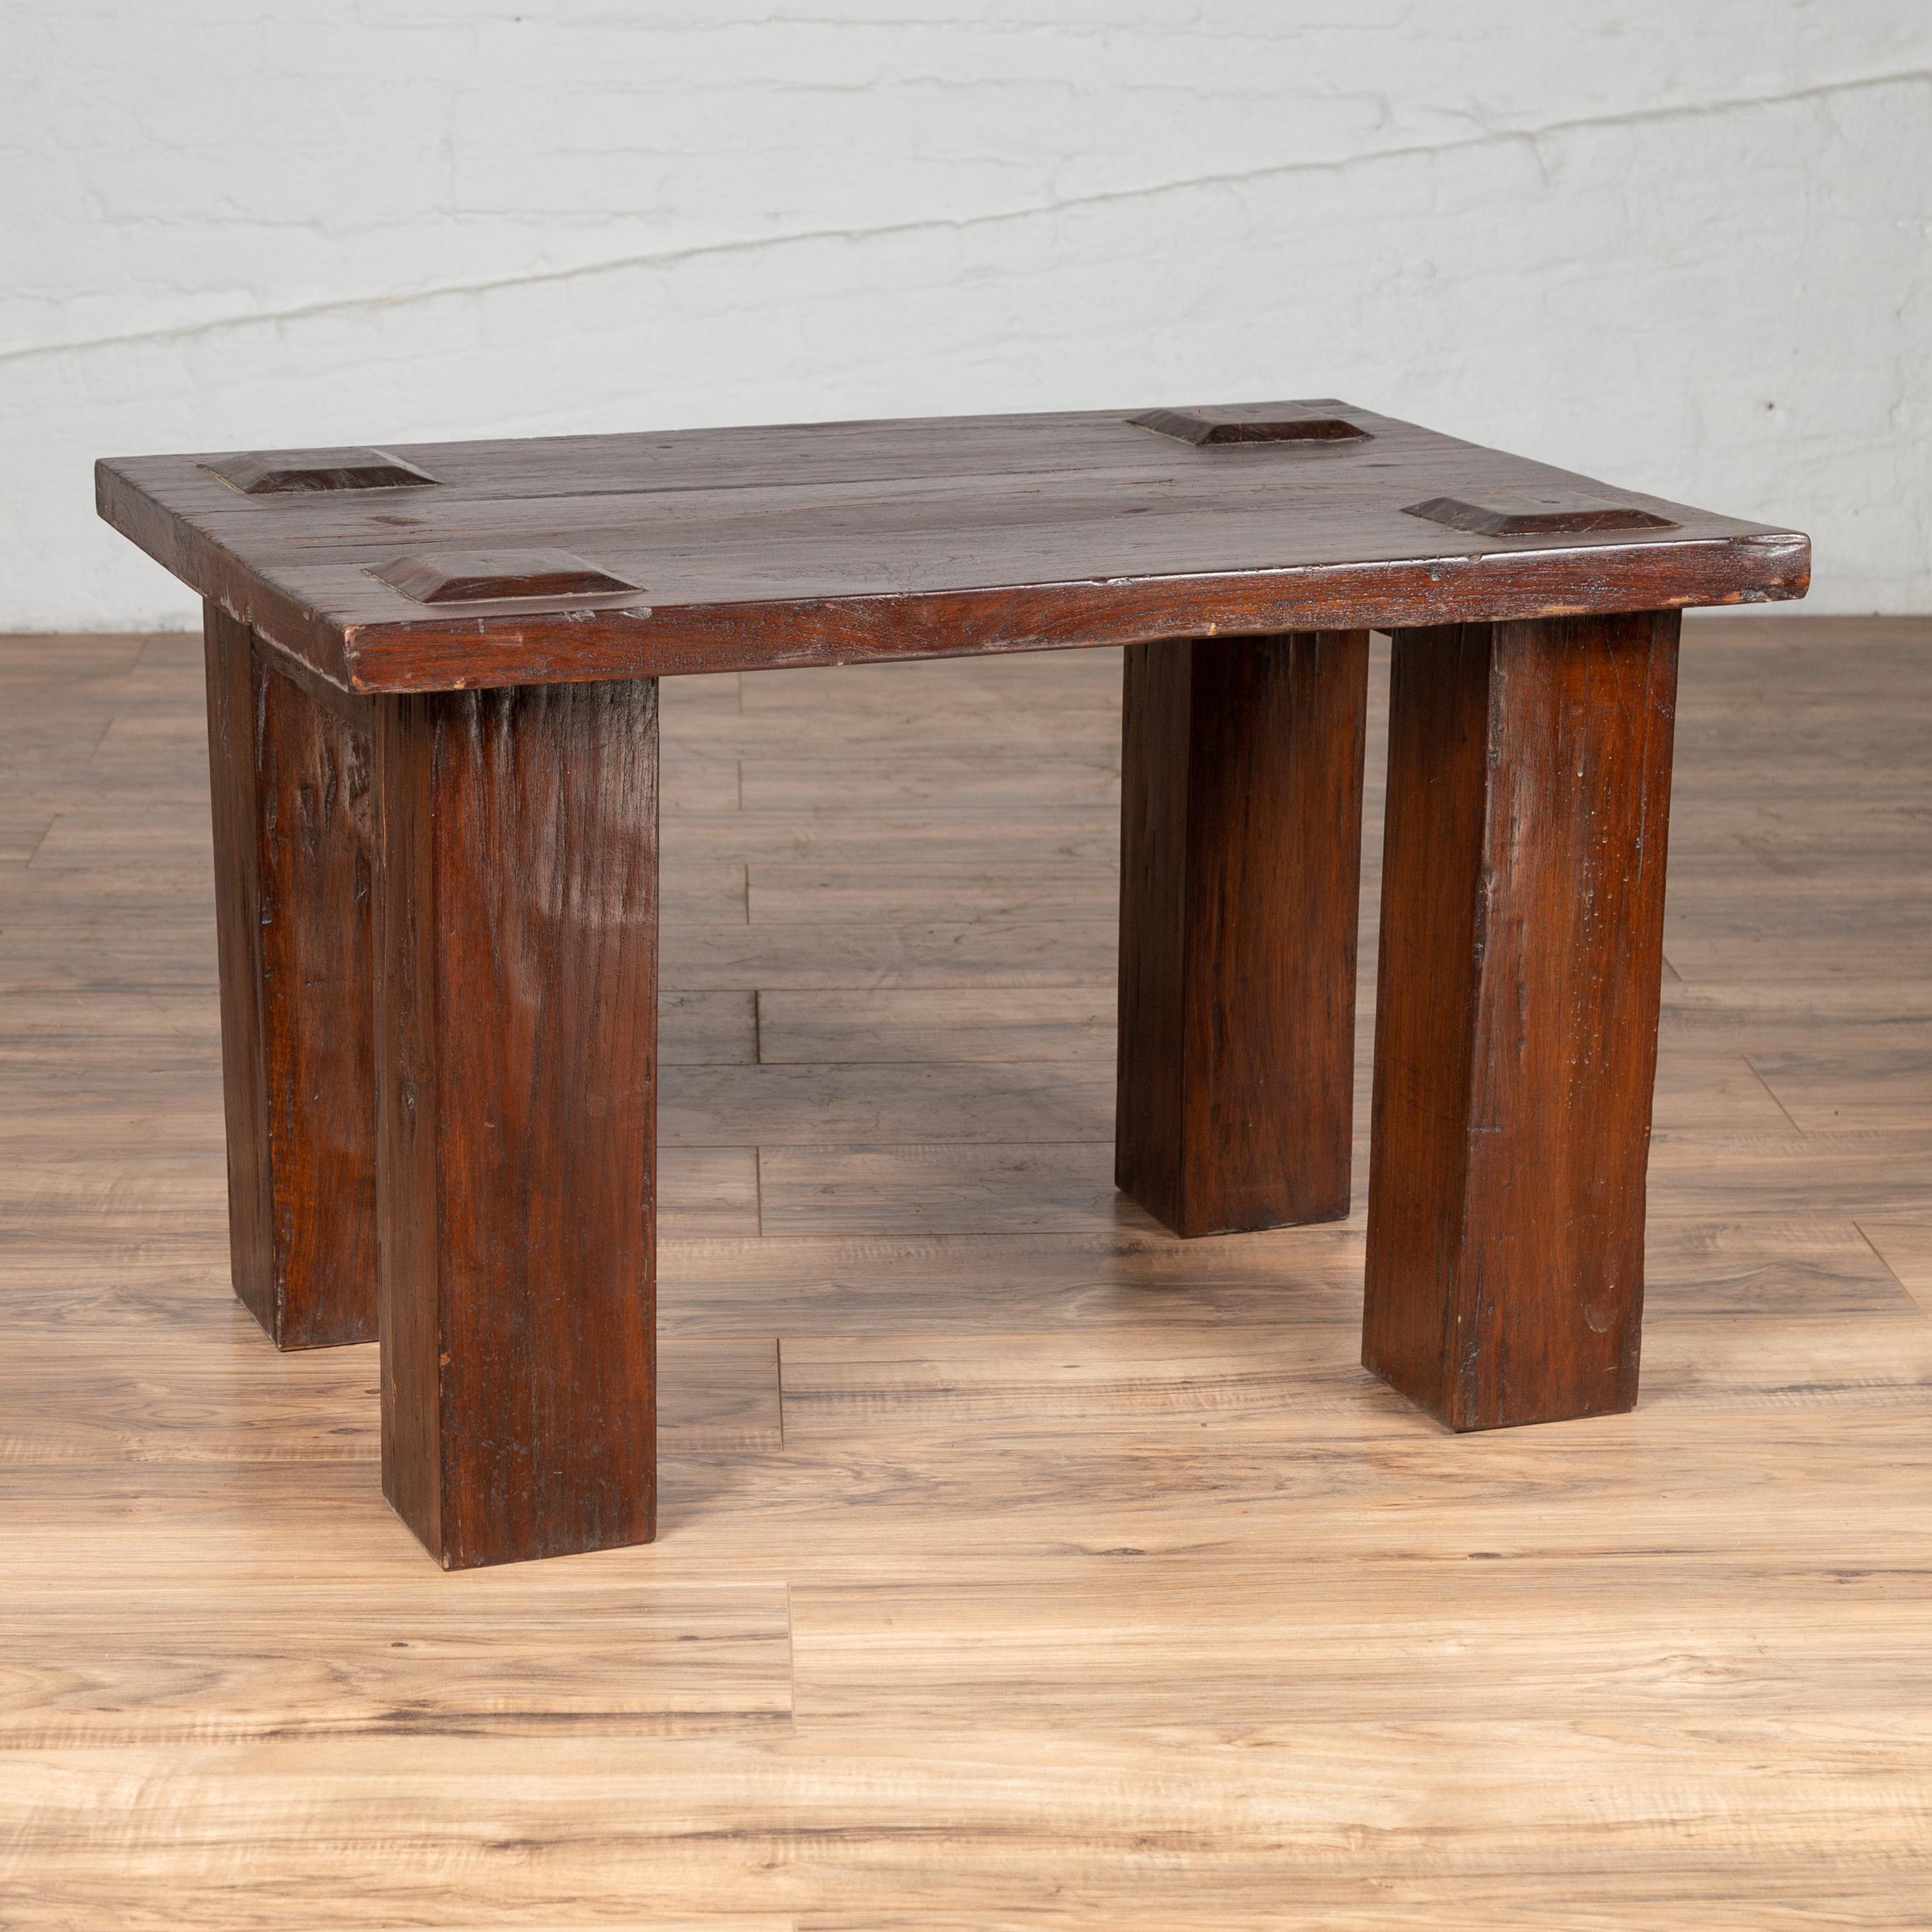 A vintage Javanese wooden bench from the mid-20th century, with raised motifs and straight legs. Born on the island of Java during the midcentury period, this wooden bench charms us with its rustic presence and simple lines. Featuring a rectangular